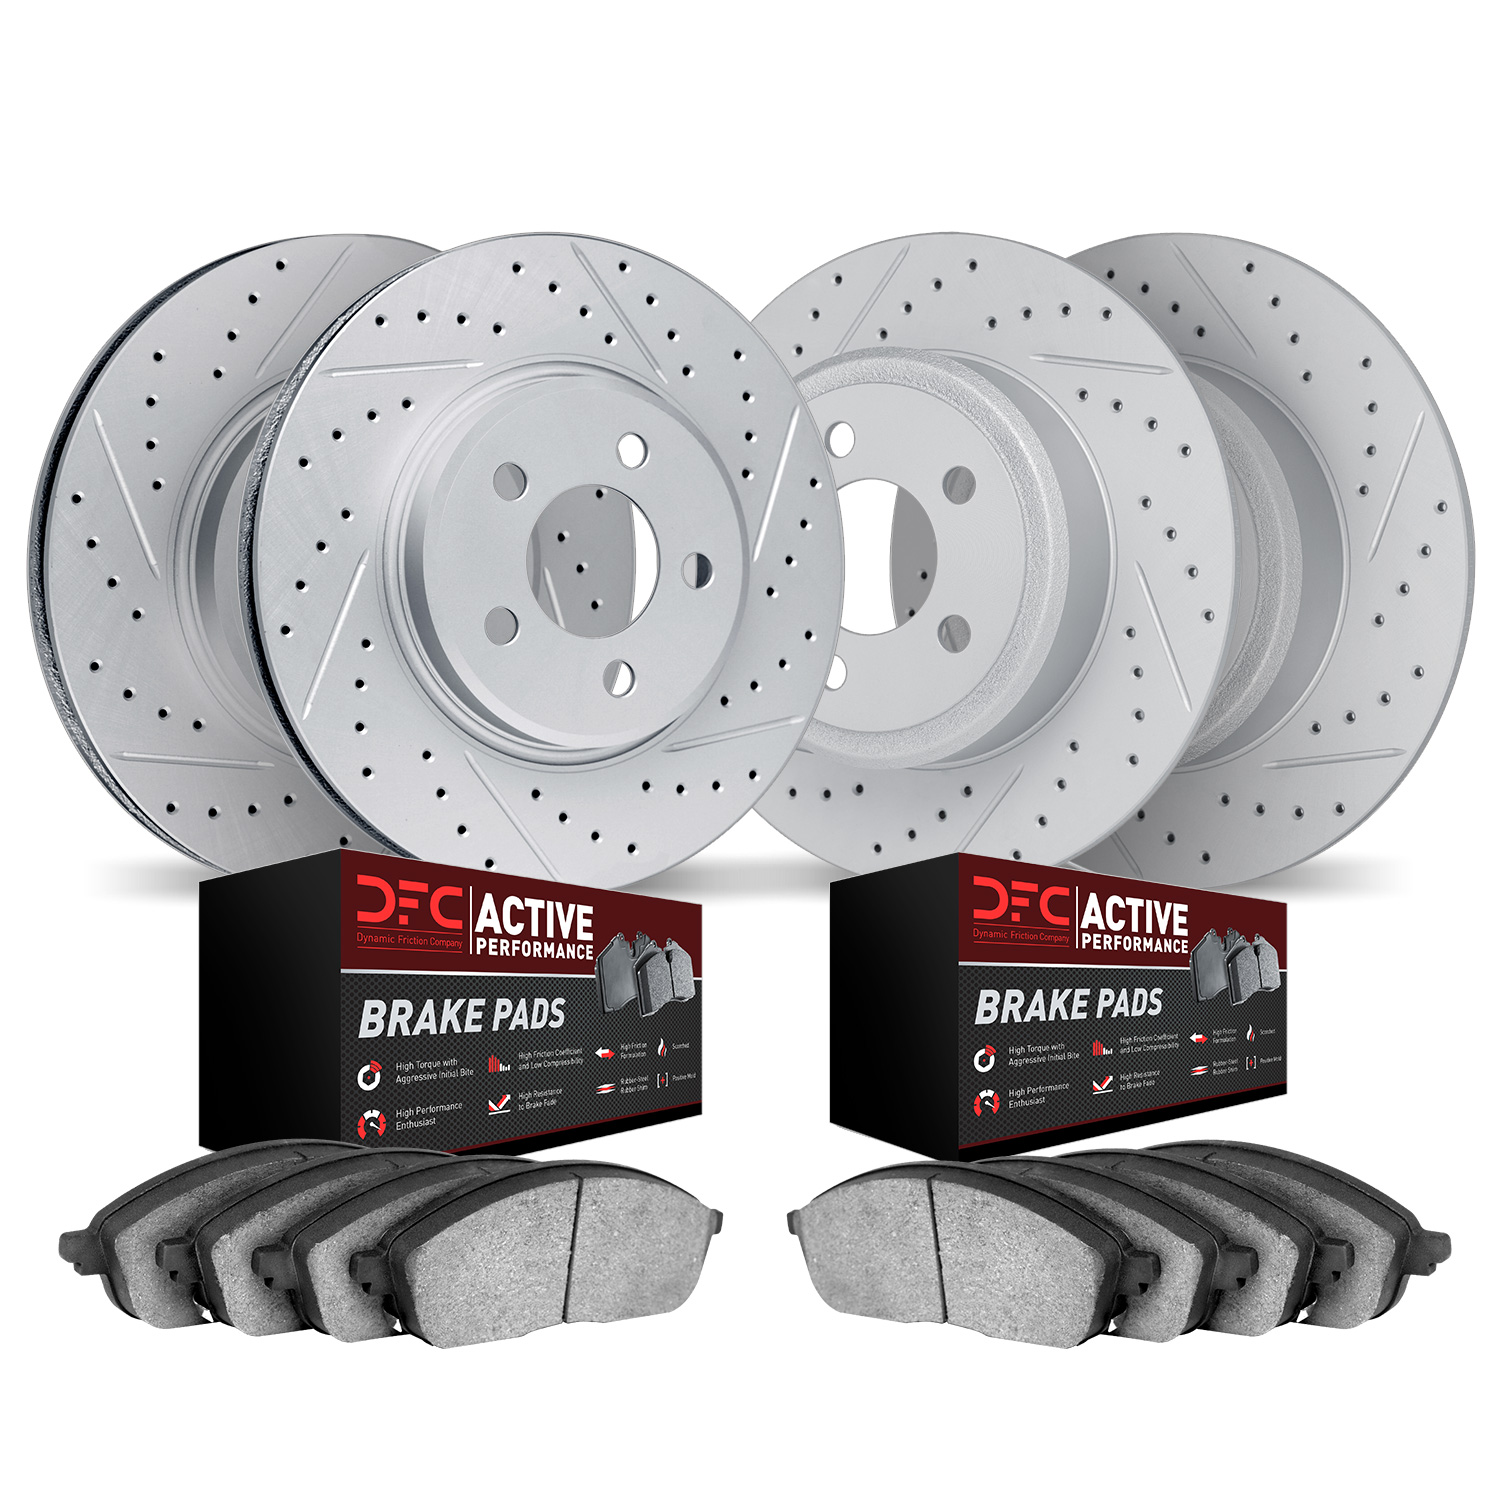 Geoperformance Drilled/Slotted Brake Rotors with Active